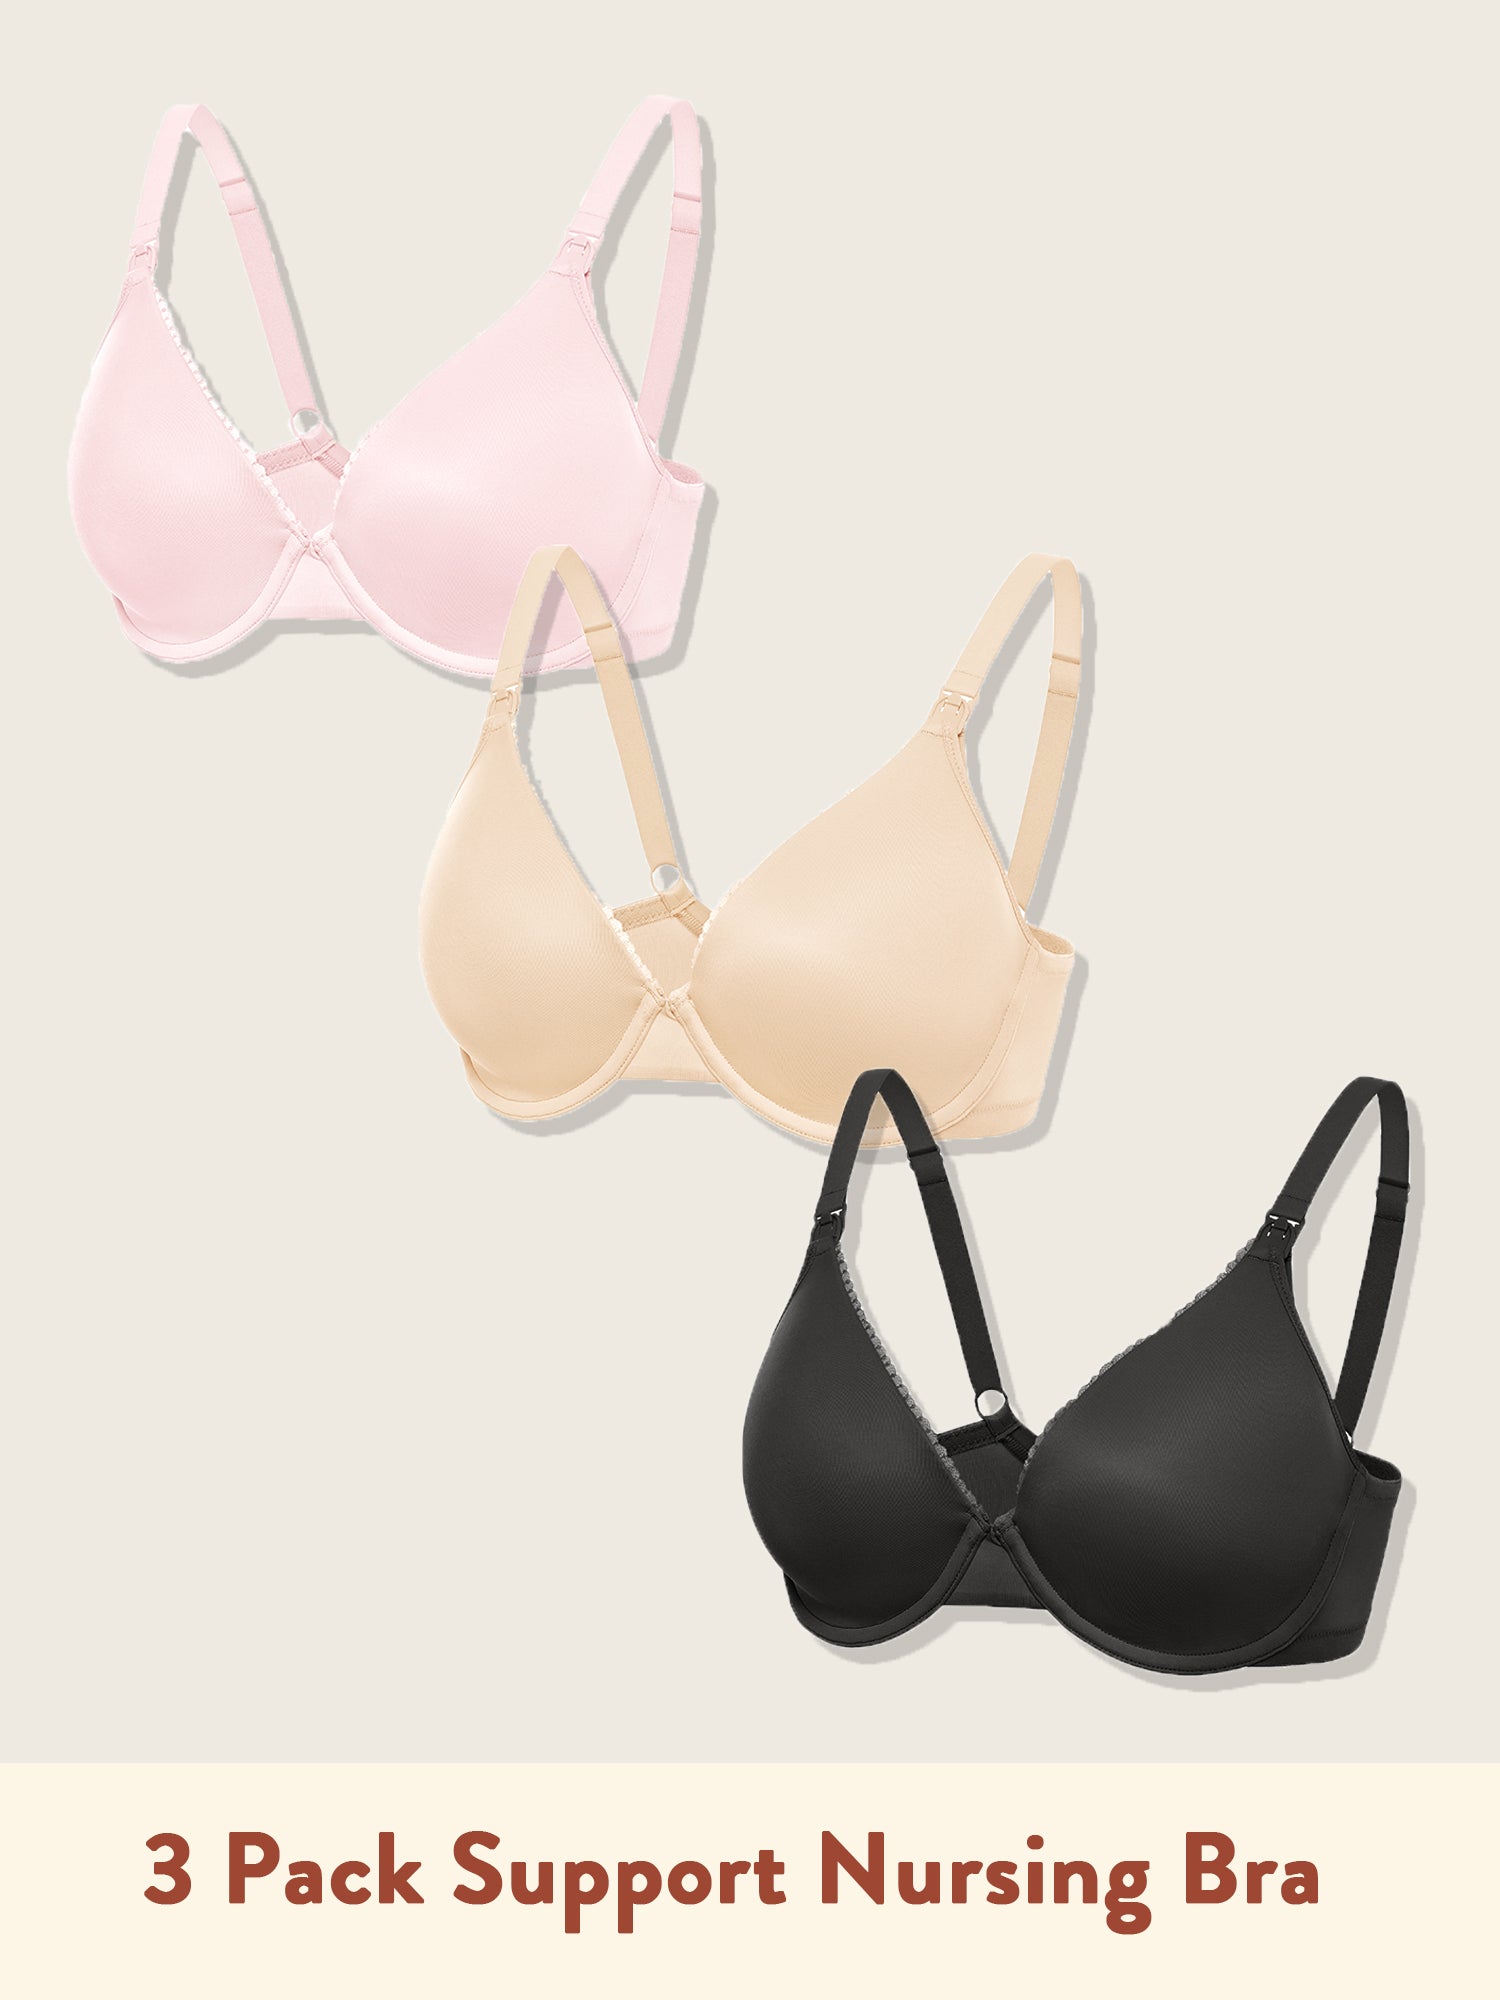 Momanda - I am in love with these stylish lace nursing bras from